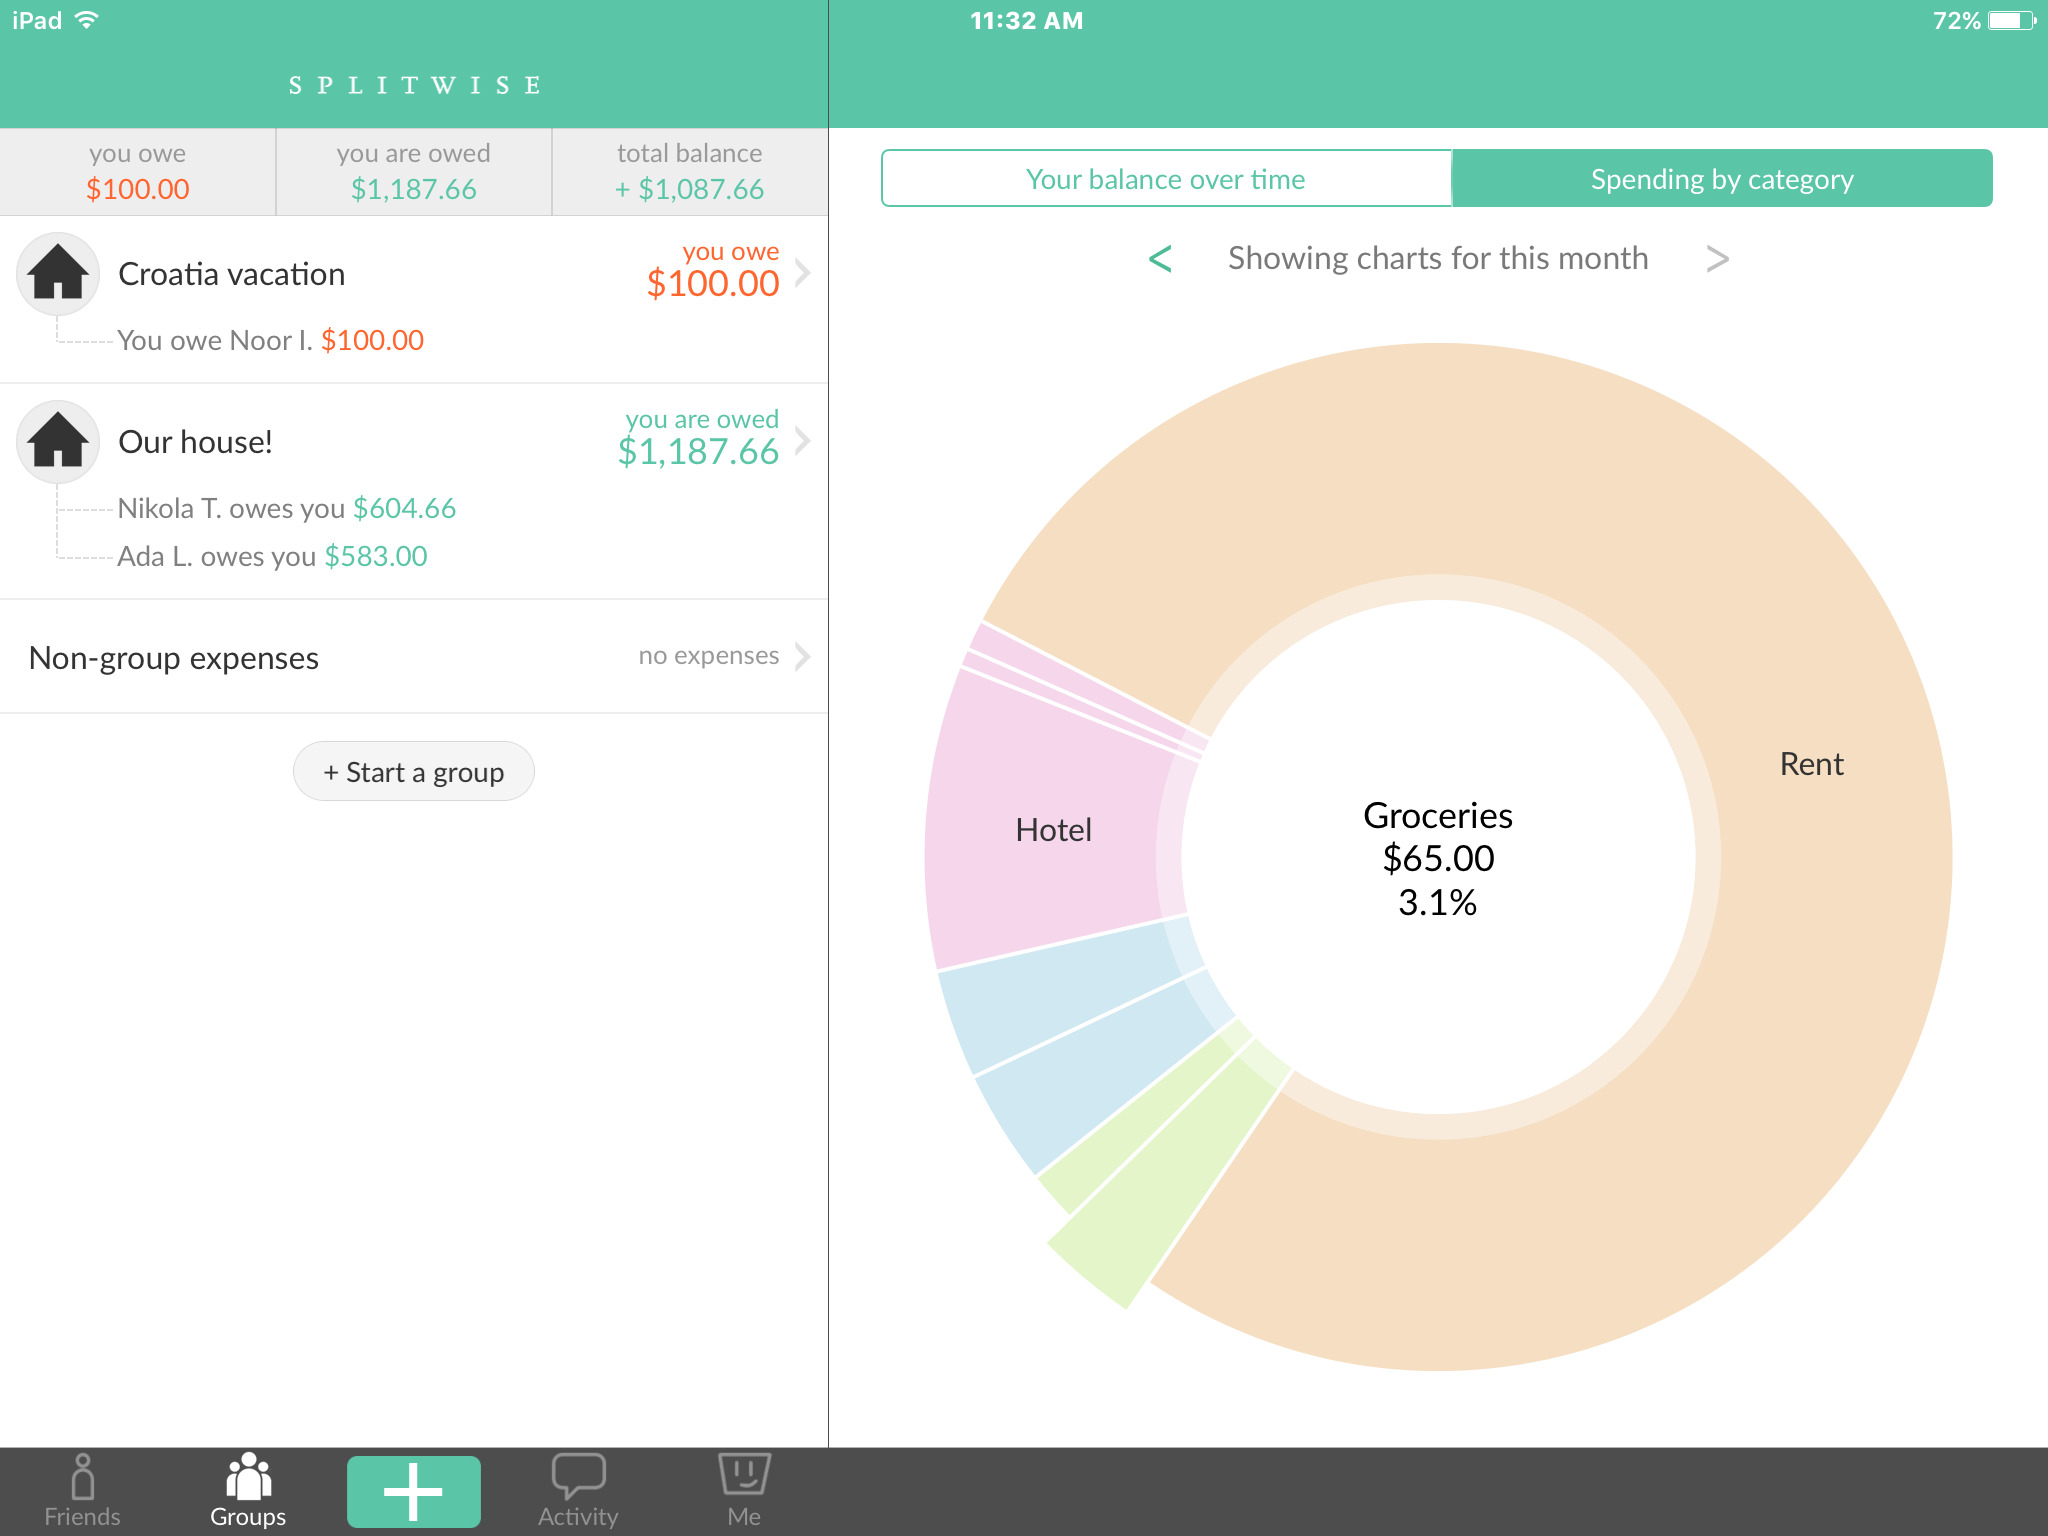 How To Find Out Monthly Expenditure On Splitwise